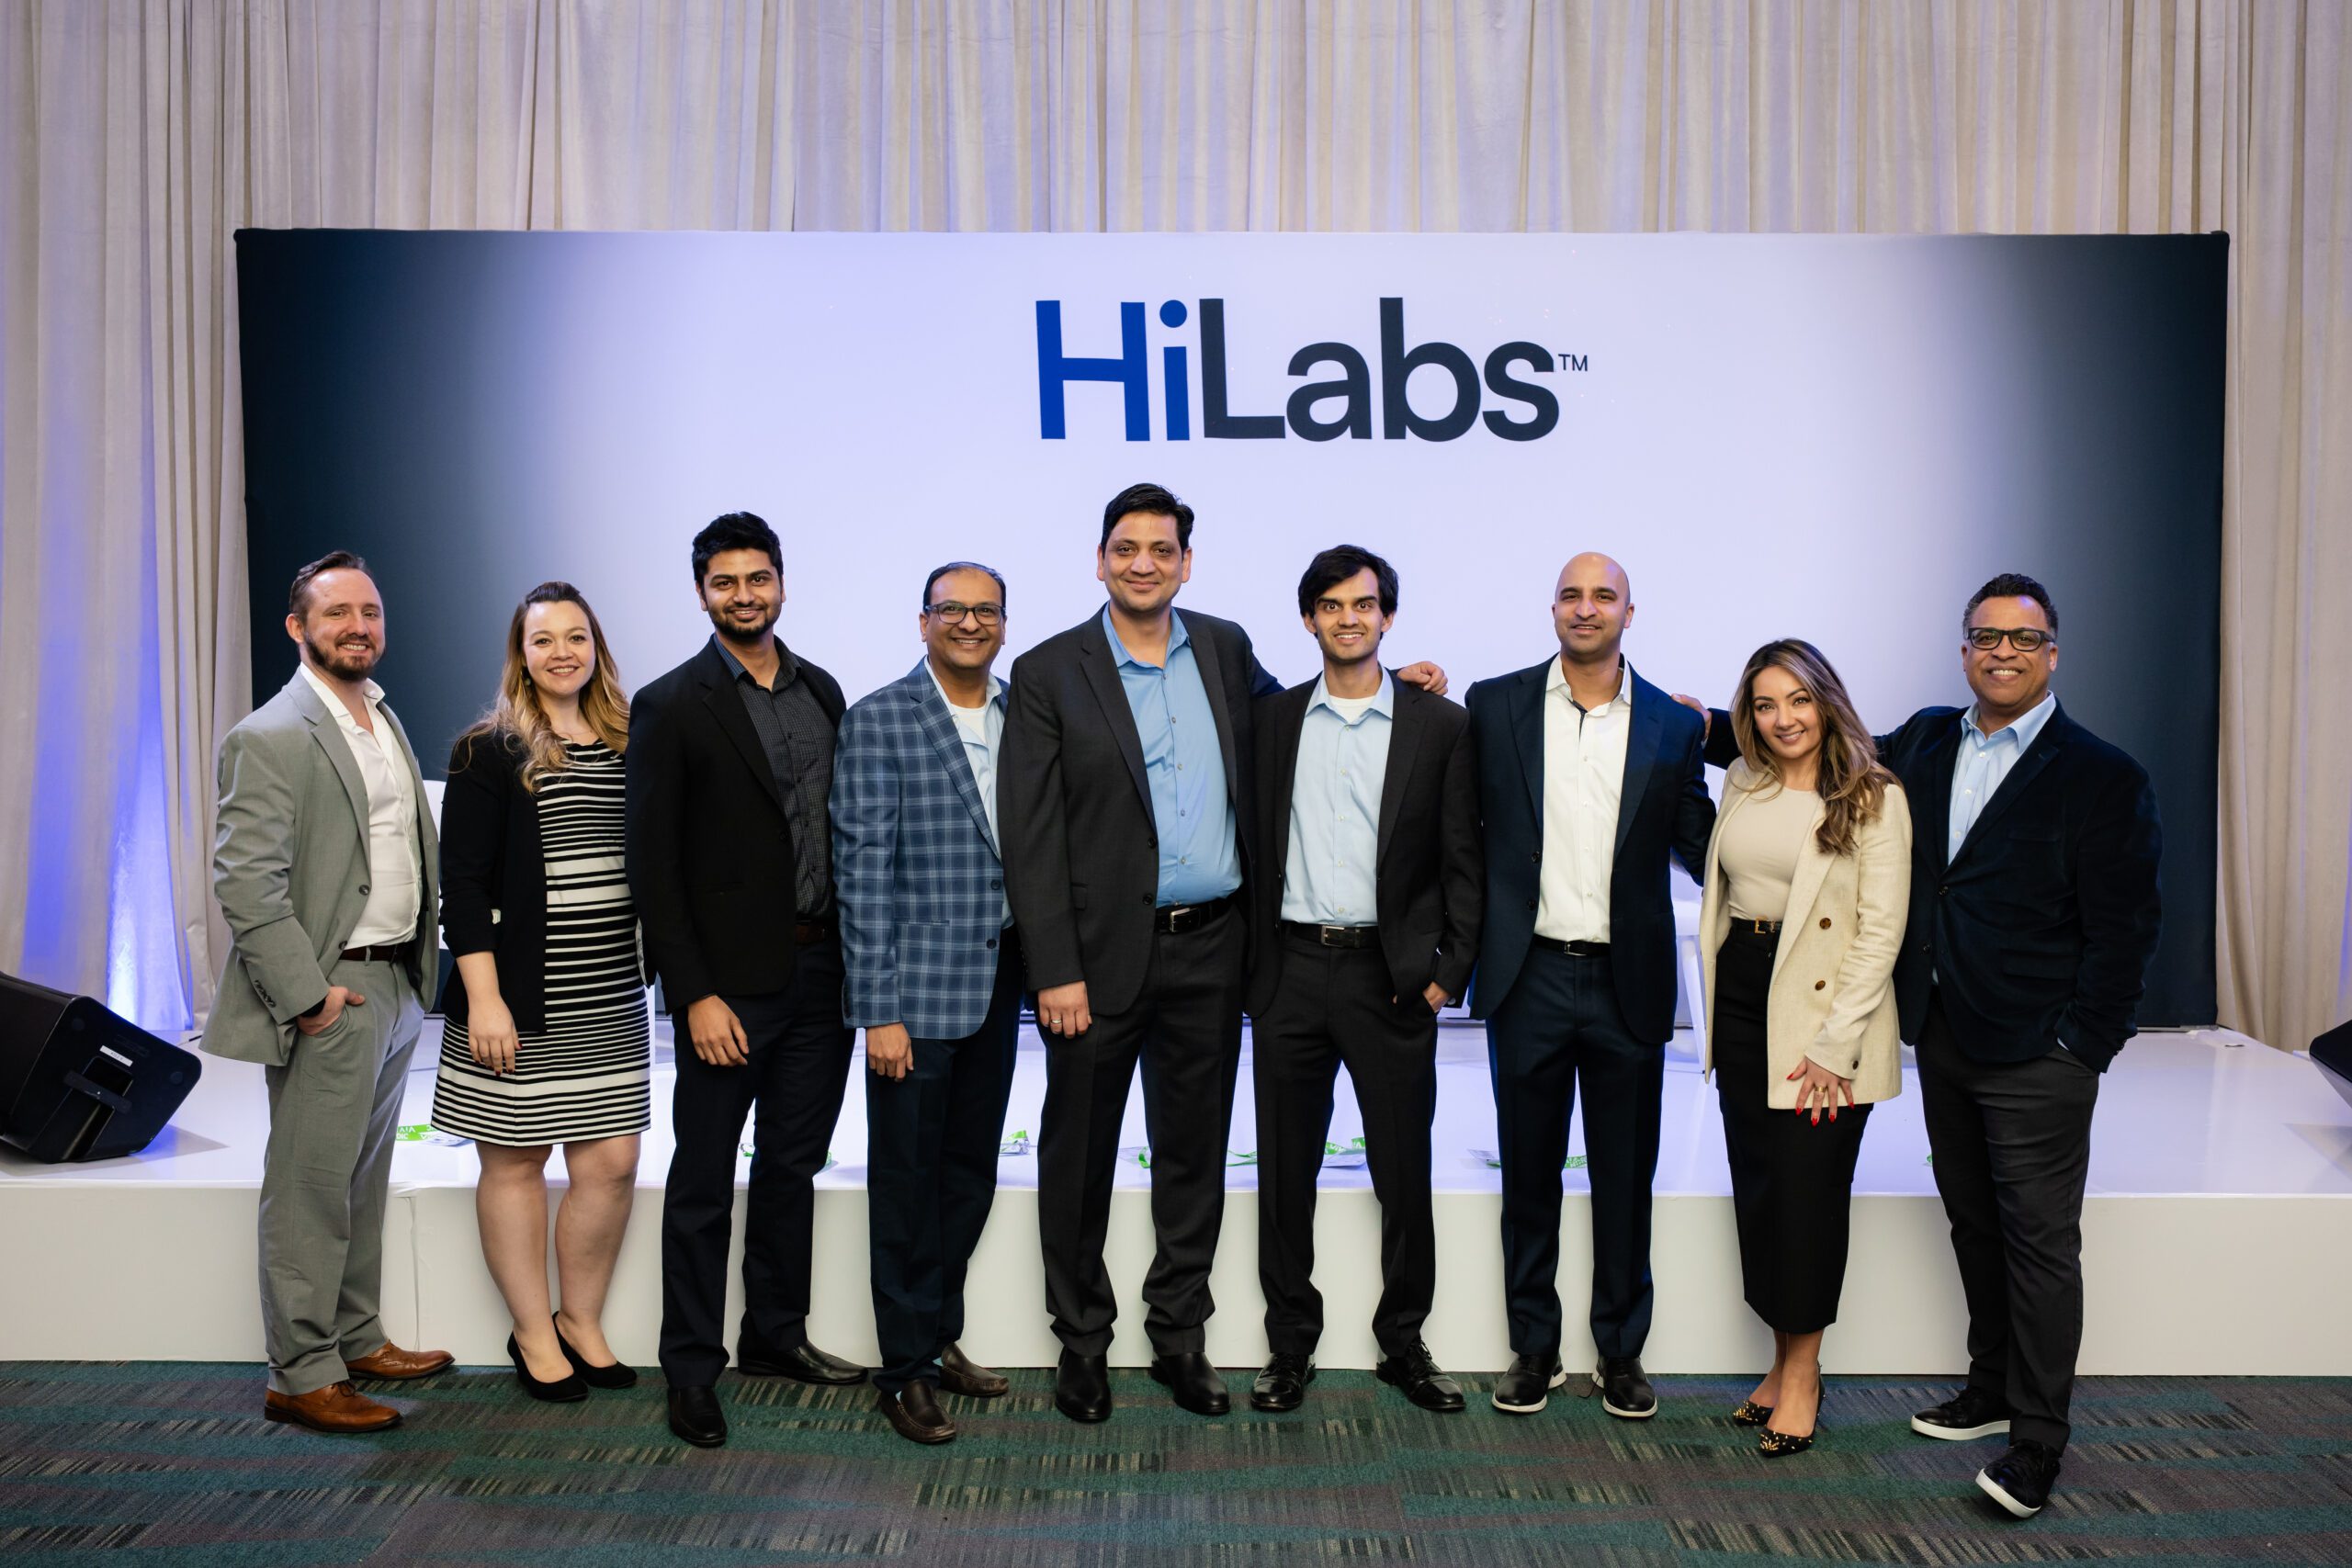 HiLabs Secures $39M to Tackle Dirty Healthcare Data with AI